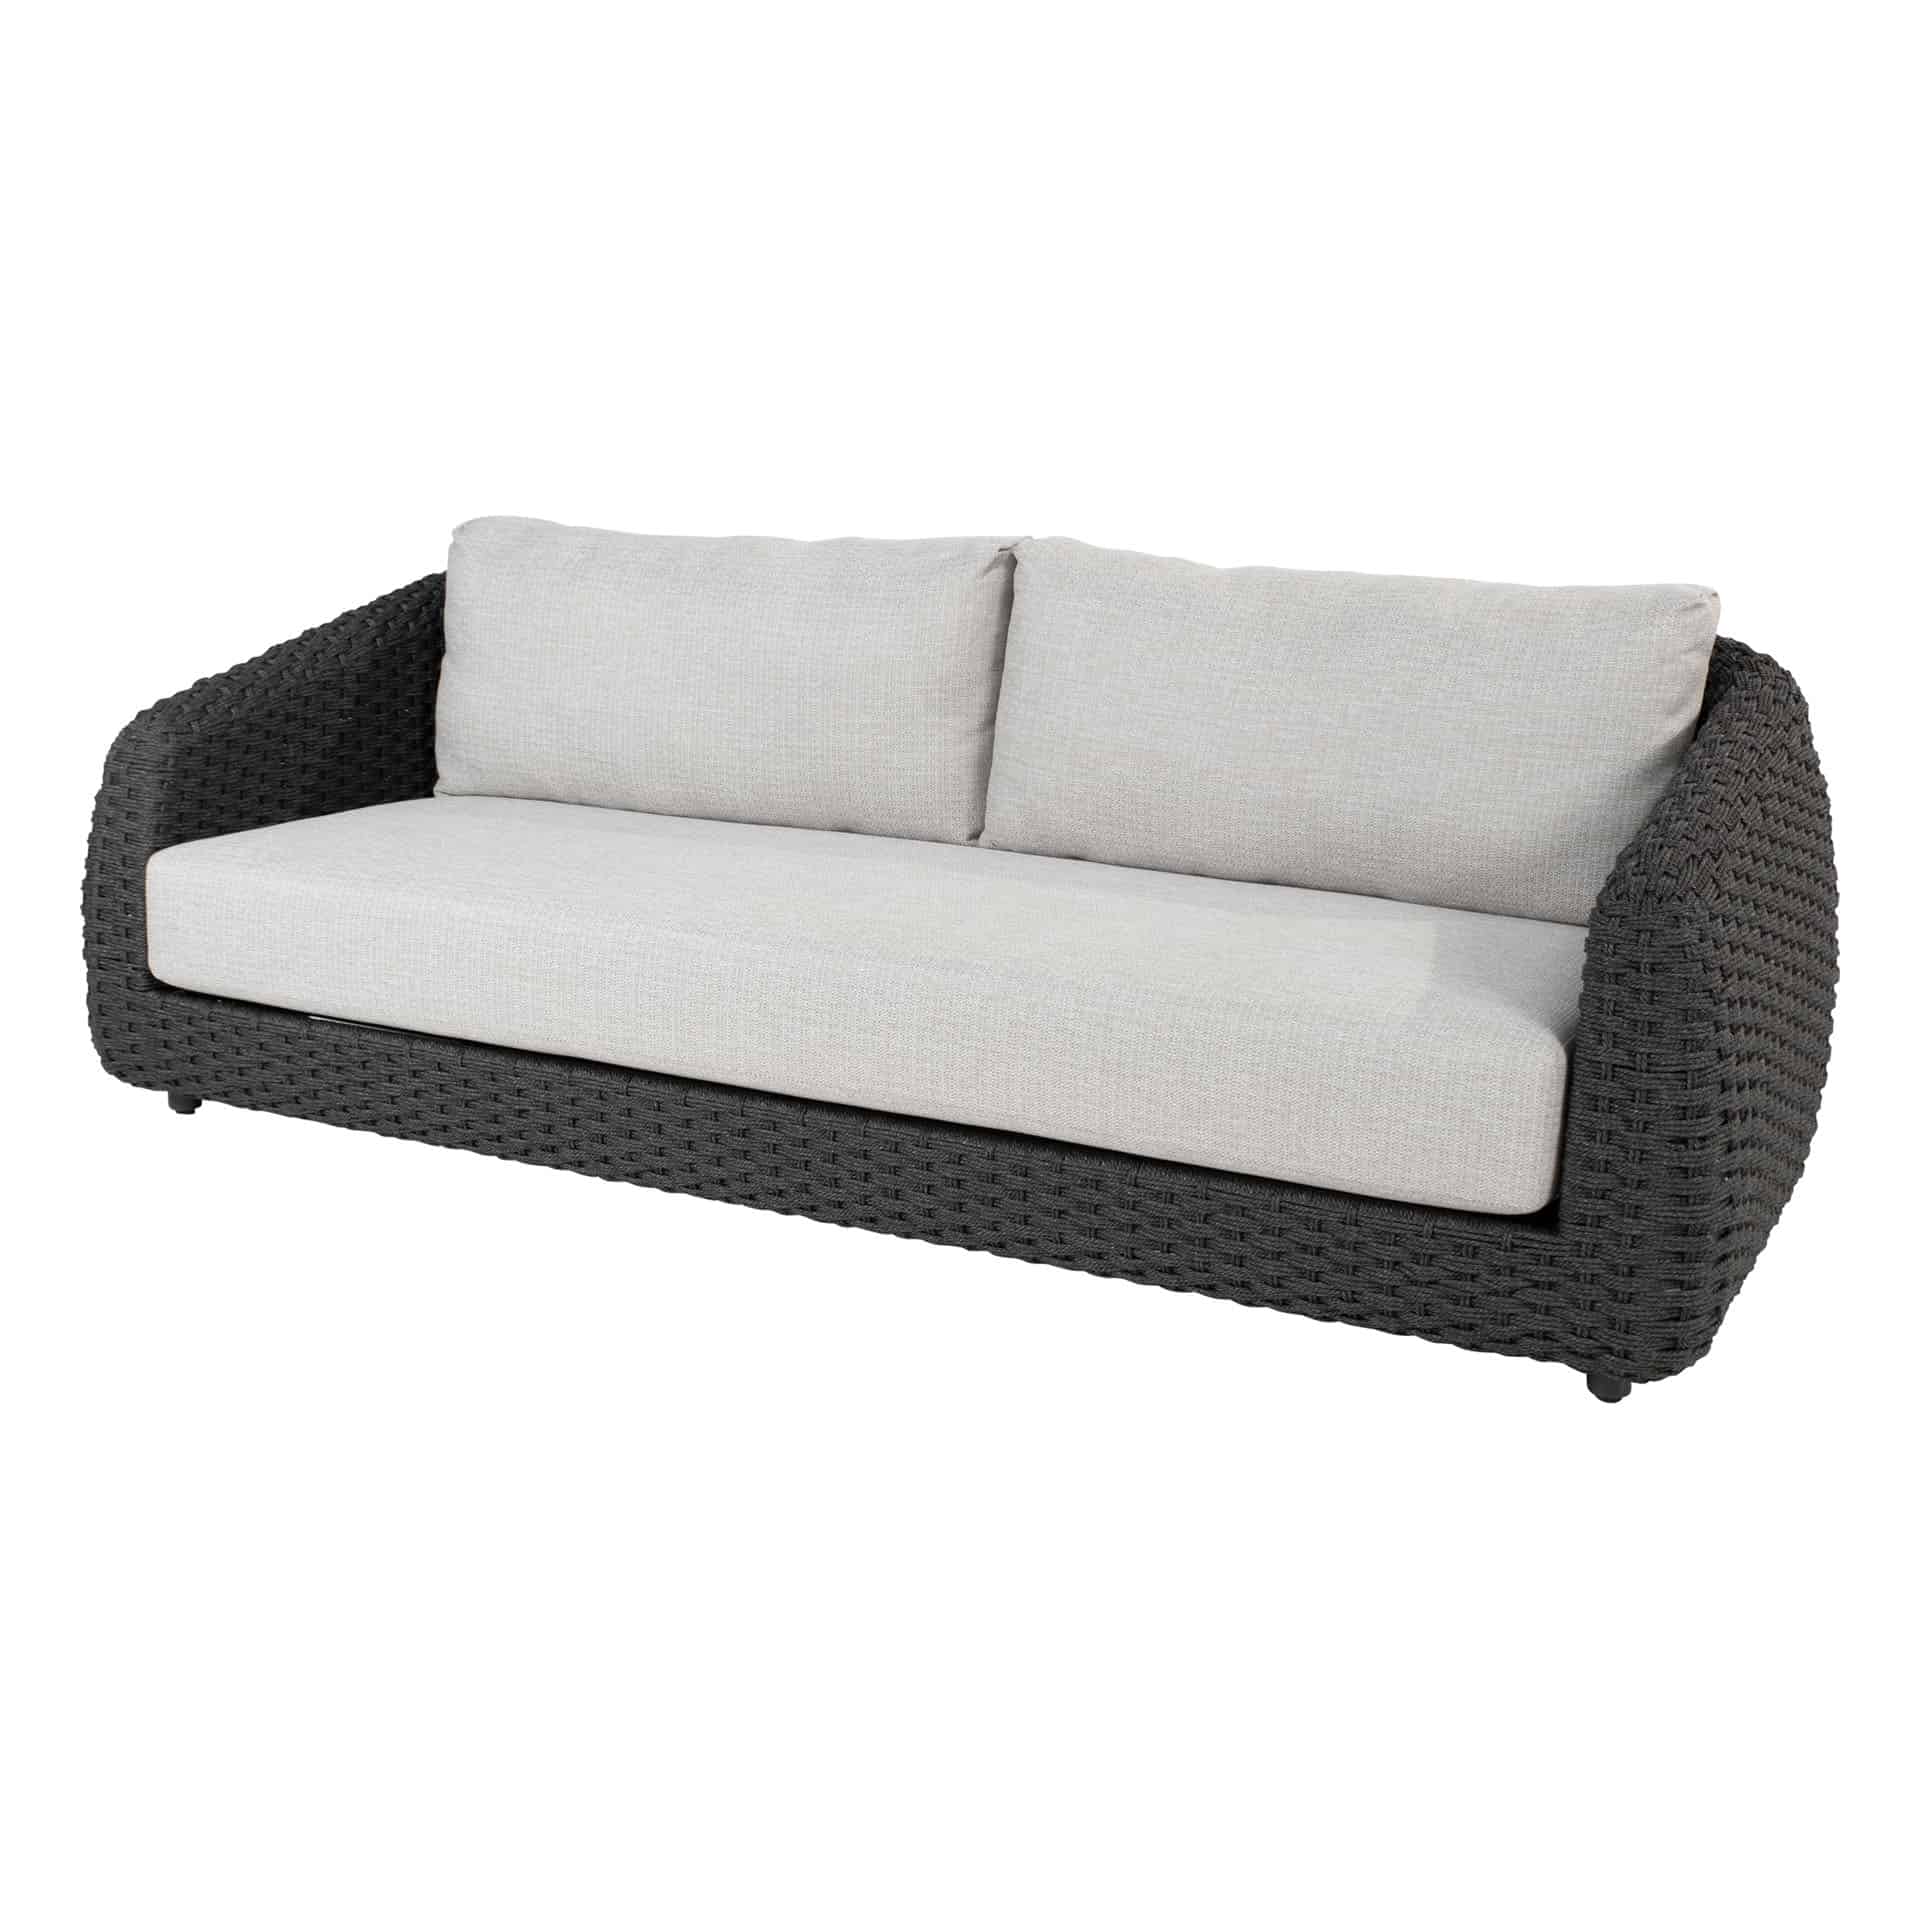 213949_-Saint-Tropez-living-bench-3-seater-anthracite-with-3-cushions-1